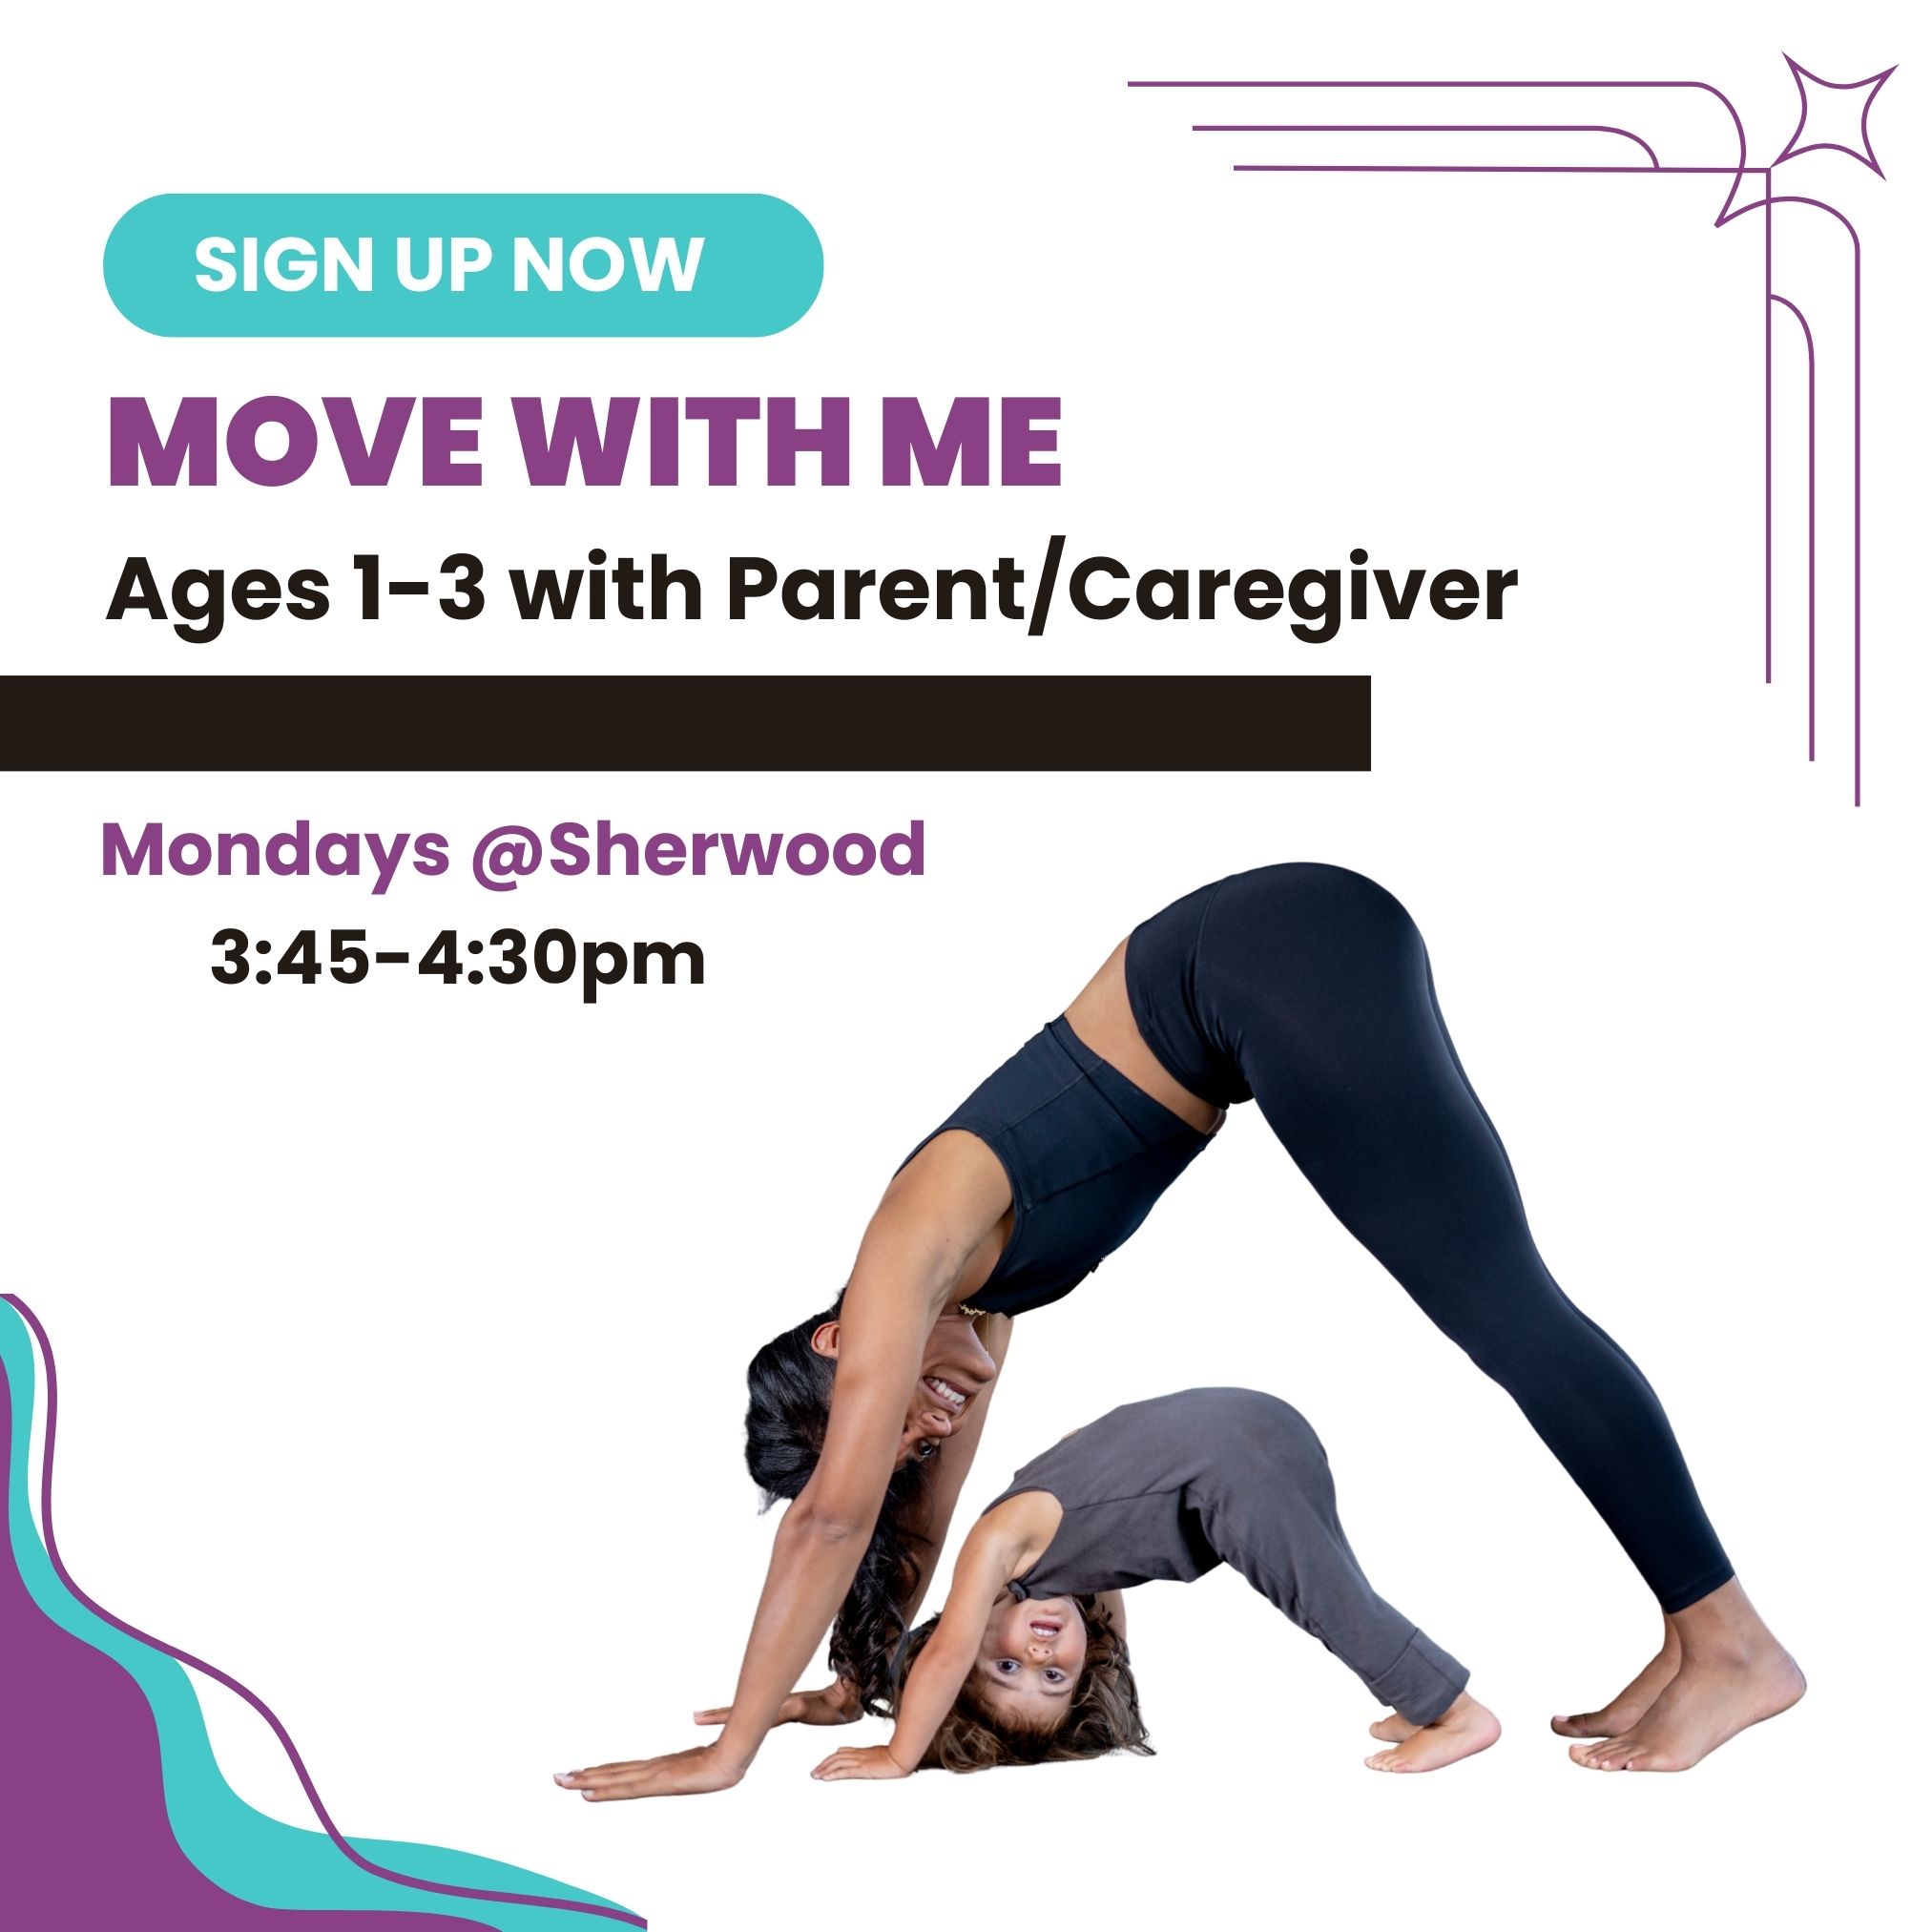 Move with Me Ages 1-3